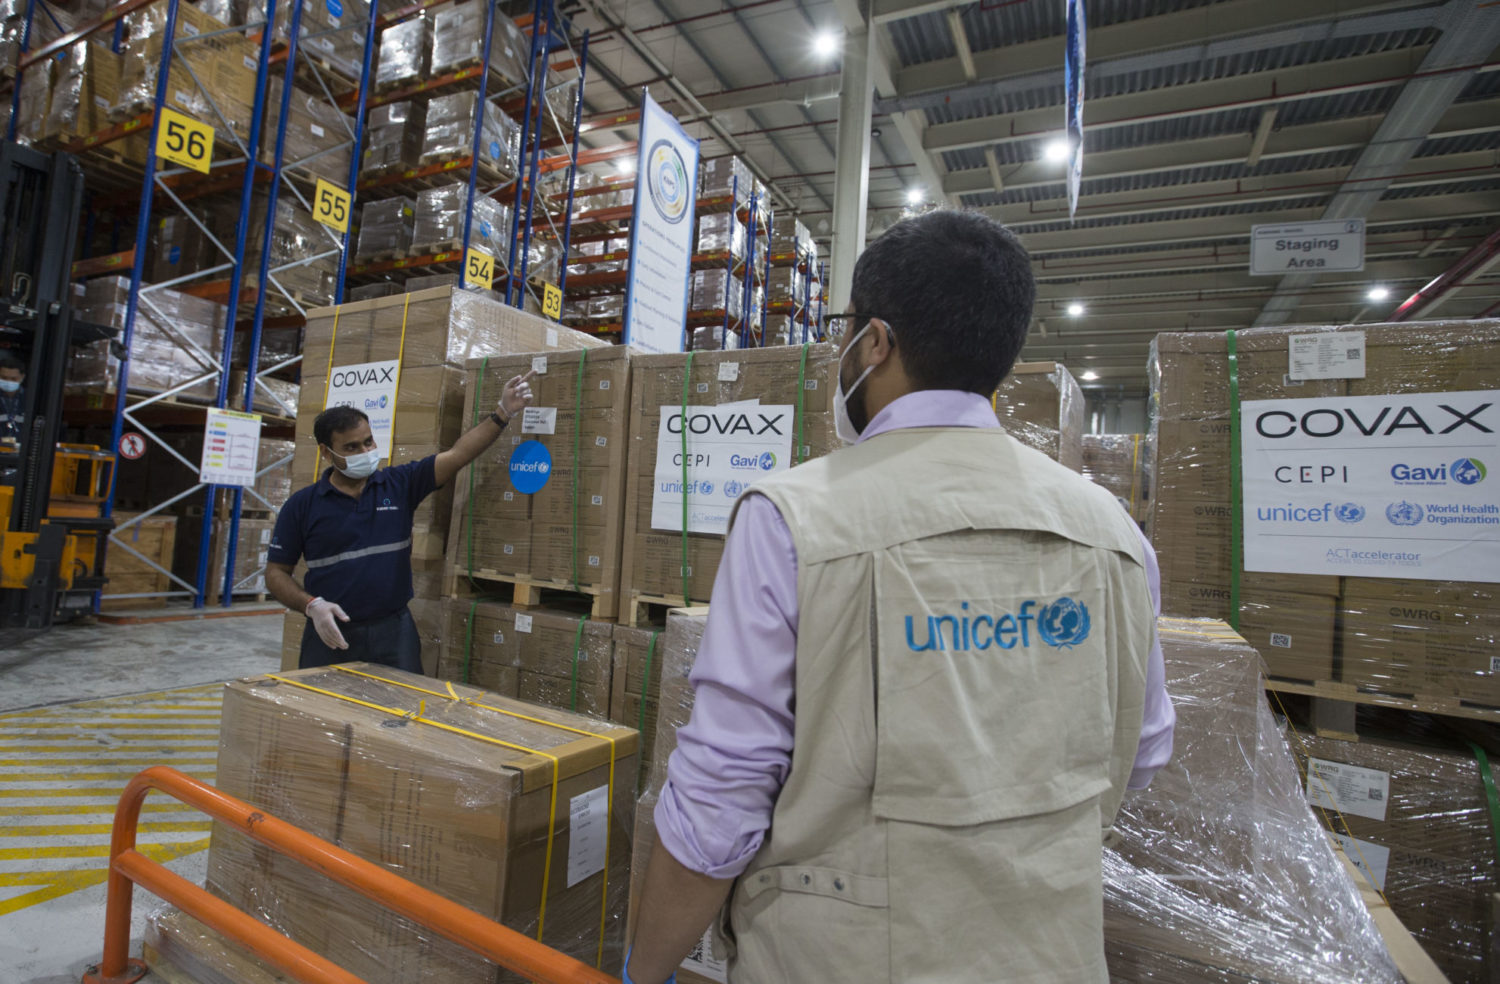 UNICEF colleagues work in a warehouse overseeing the distribution of boxes of auto-disable syringes and safety boxes